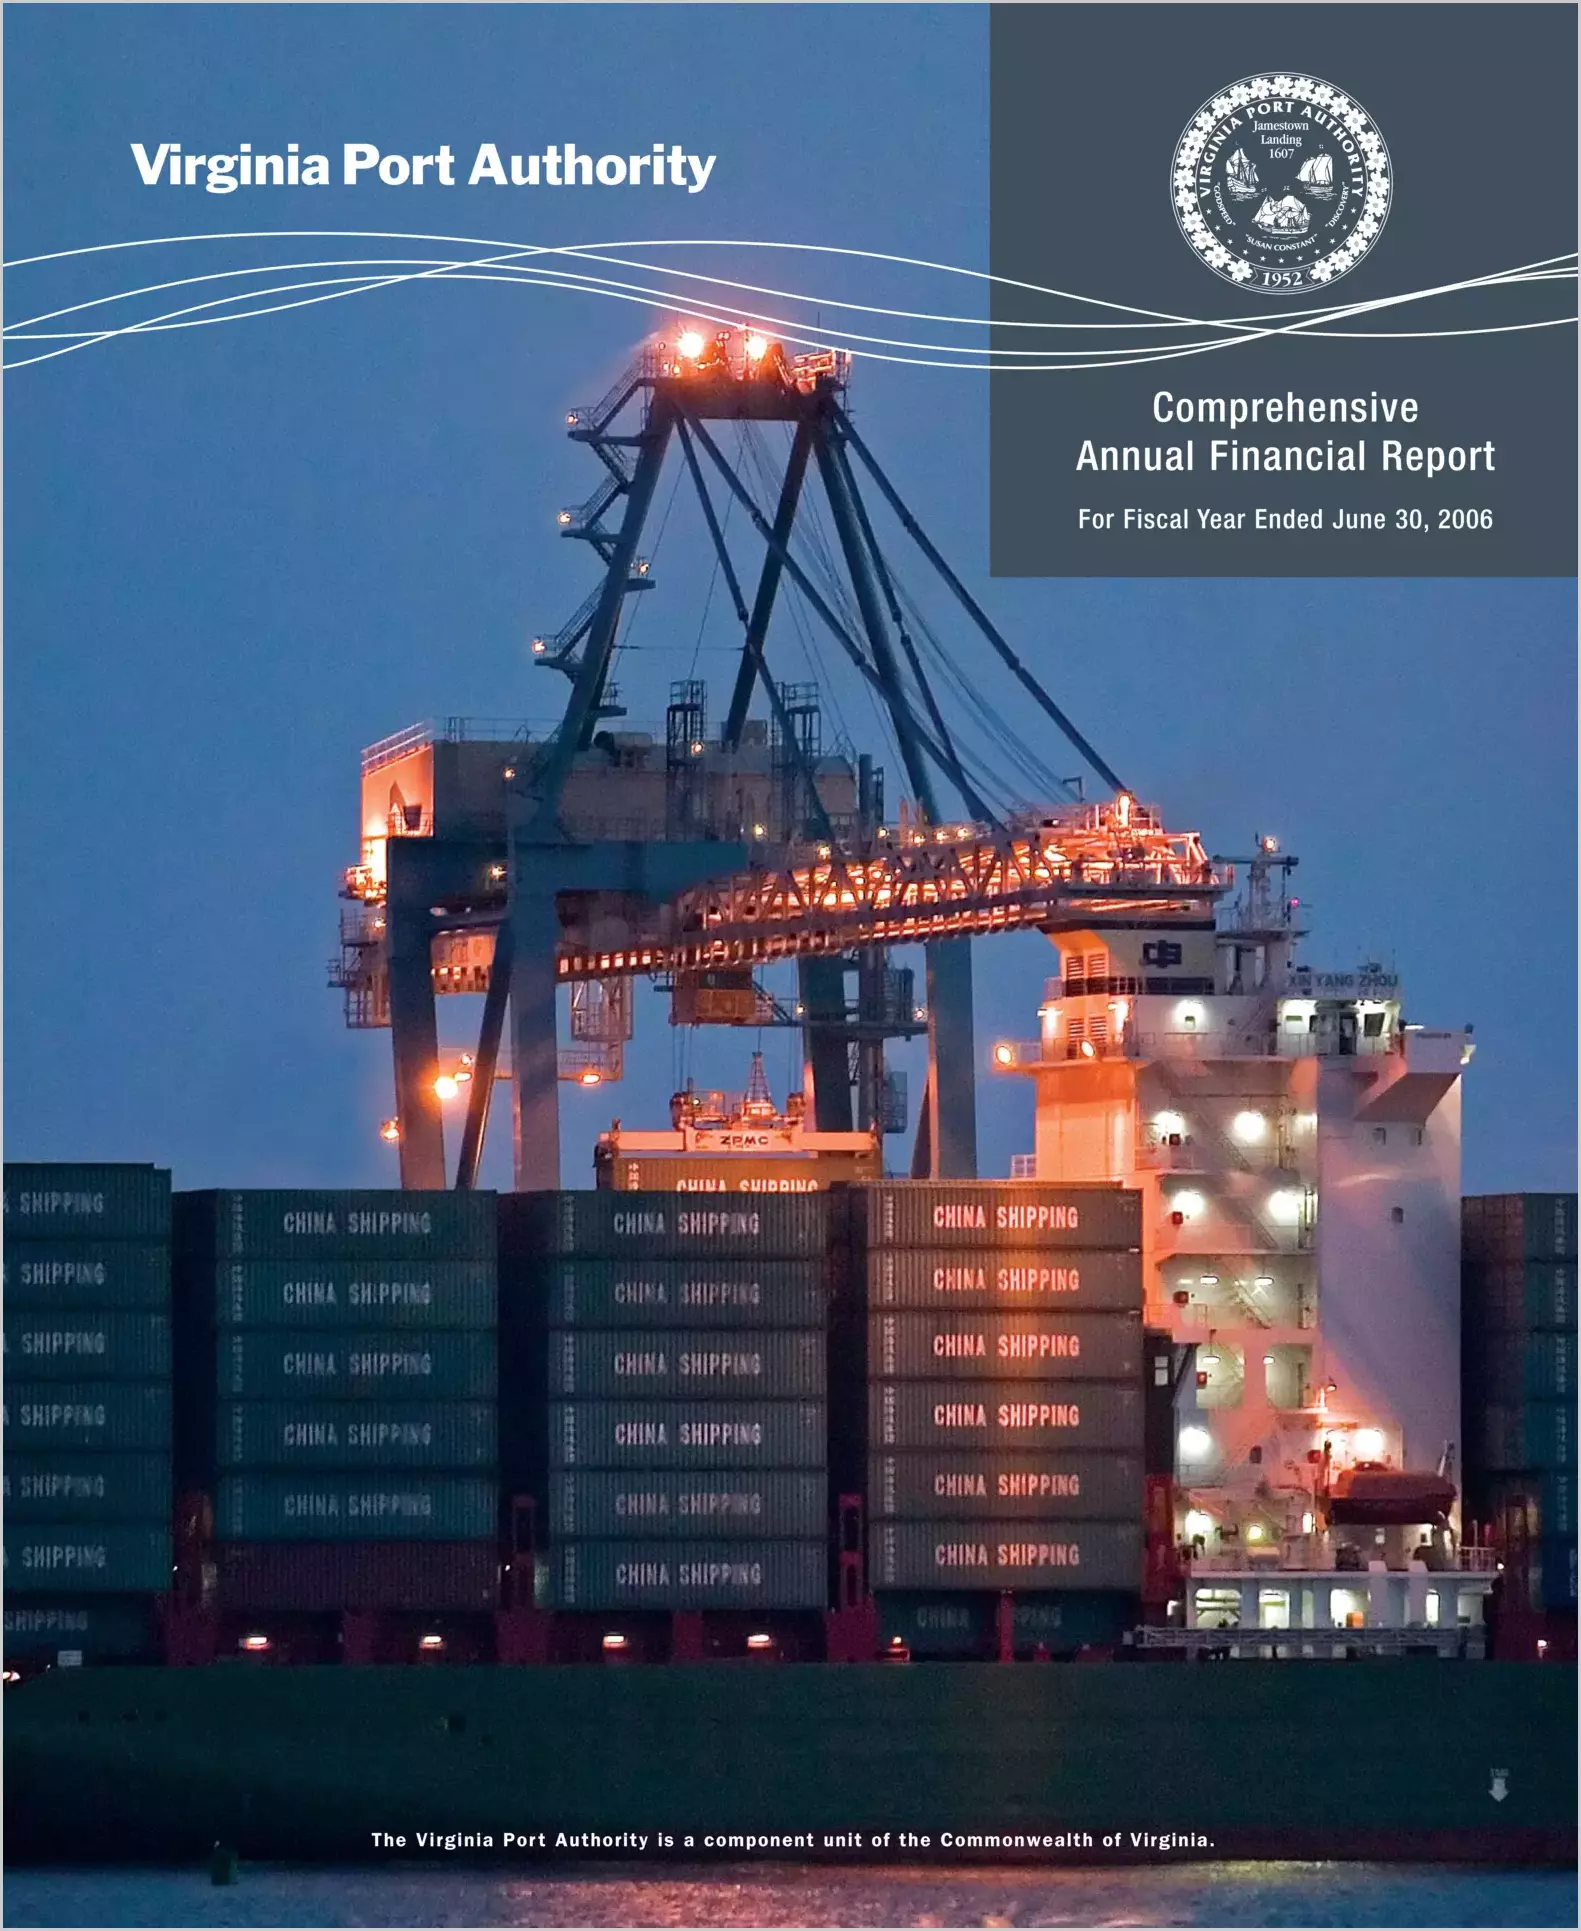 Virginia Port Authority Annual Financial Report for the year ended June 30, 2006